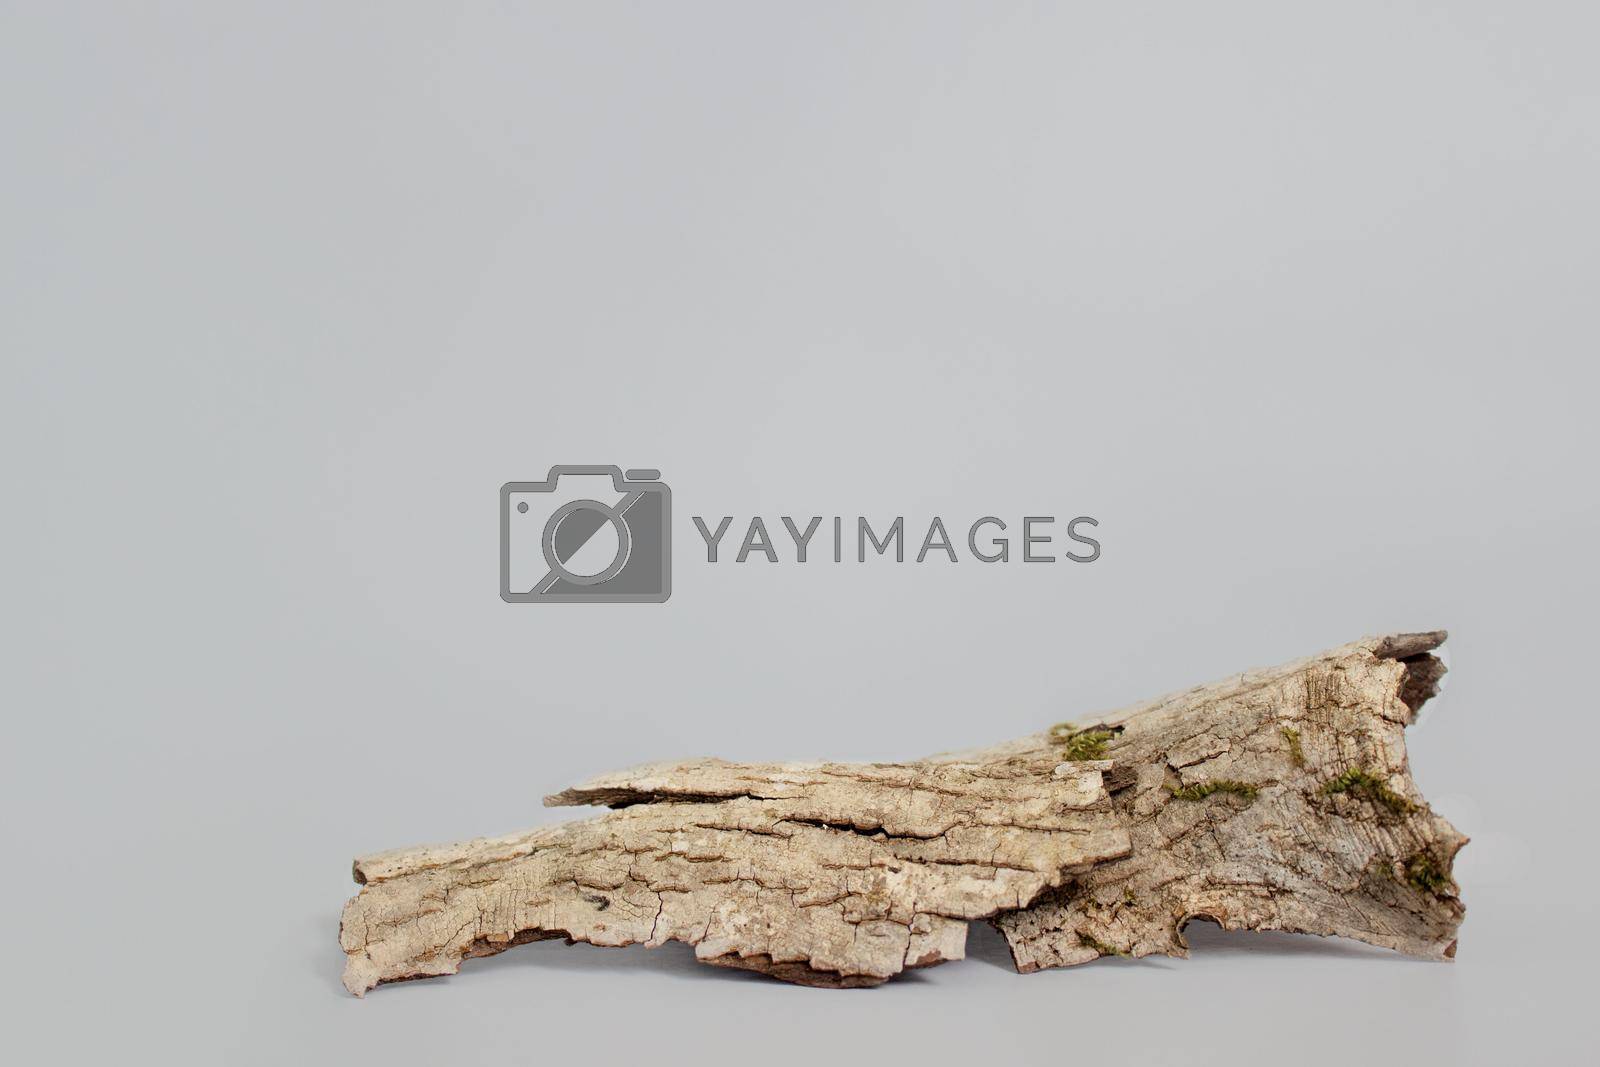 Royalty free image of empty bark of tree podium minimalism on grey background. Copy space, place for text by Tasheva